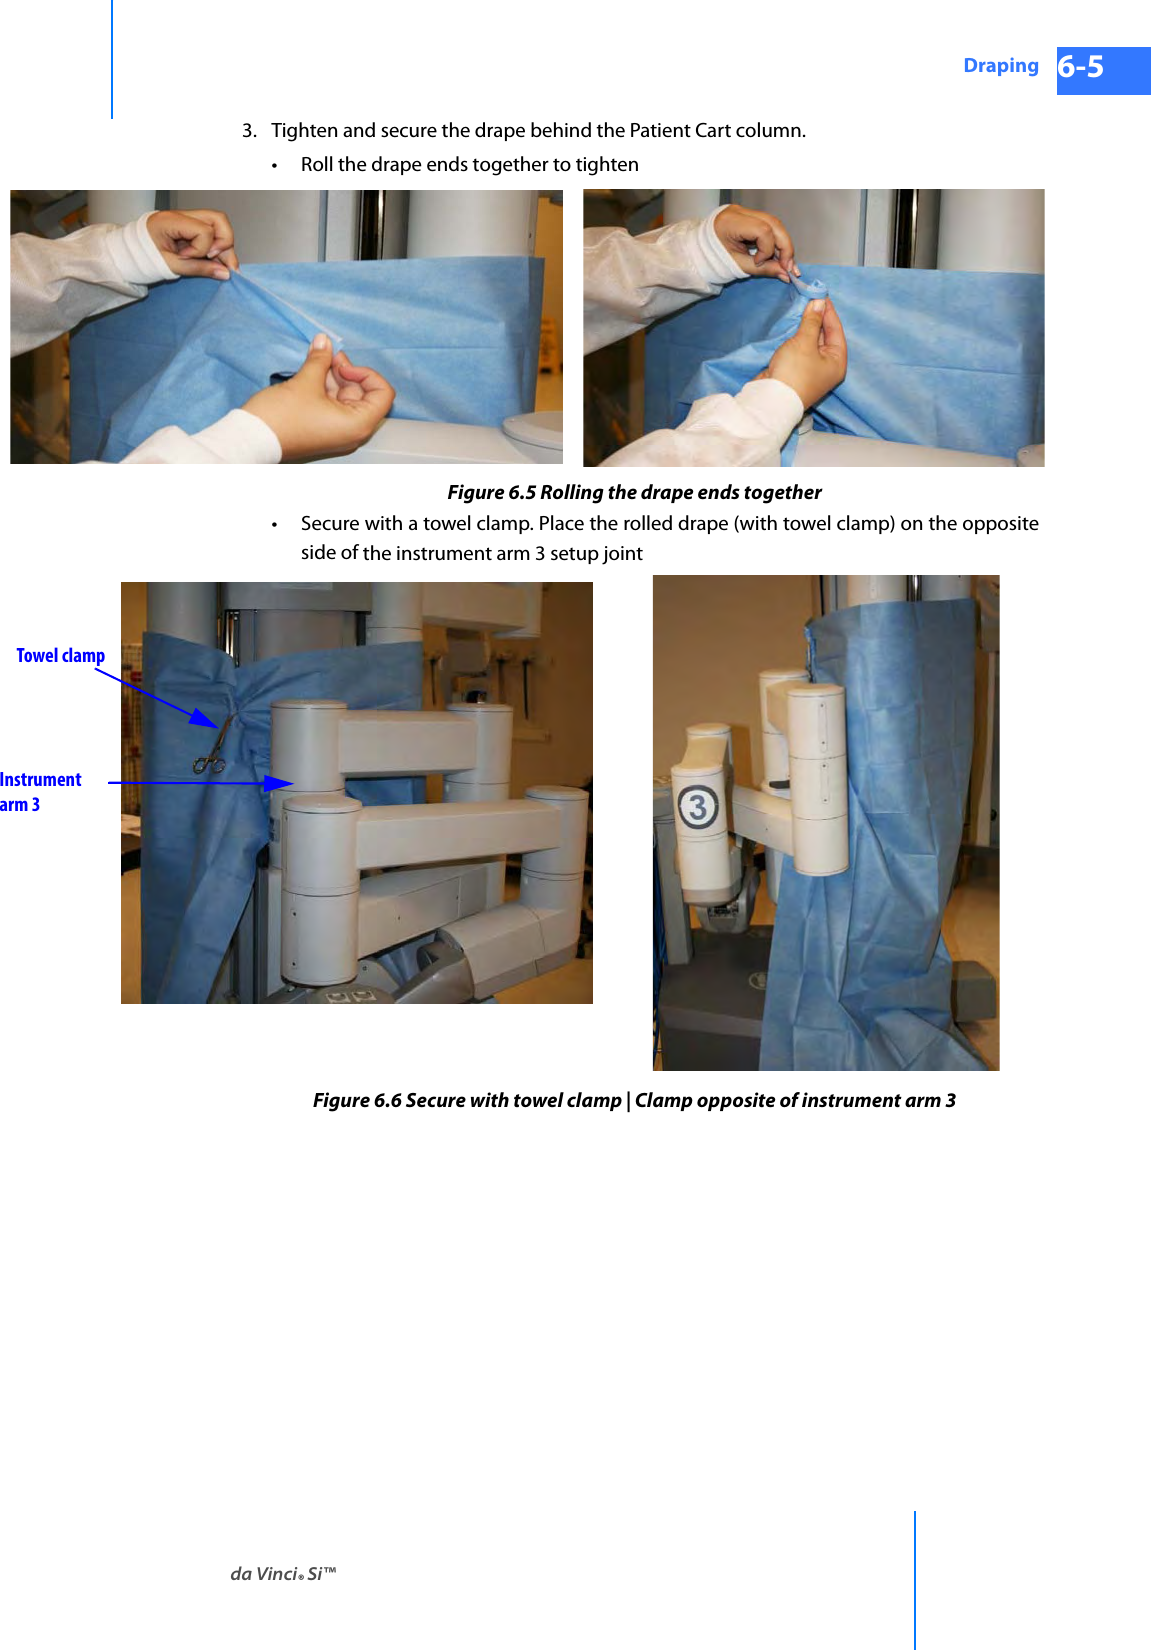 da Vinci® Si™Draping 6-5DRAFT/PRE-RELEASE/CONFIDENTIAL 10/9/143. Tighten and secure the drape behind the Patient Cart column.• Roll the drape ends together to tightenFigure 6.5 Rolling the drape ends together• Secure with a towel clamp. Place the rolled drape (with towel clamp) on the opposite side of the instrument arm 3 setup jointFigure 6.6 Secure with towel clamp | Clamp opposite of instrument arm 3 Towel clampInstrument arm 3